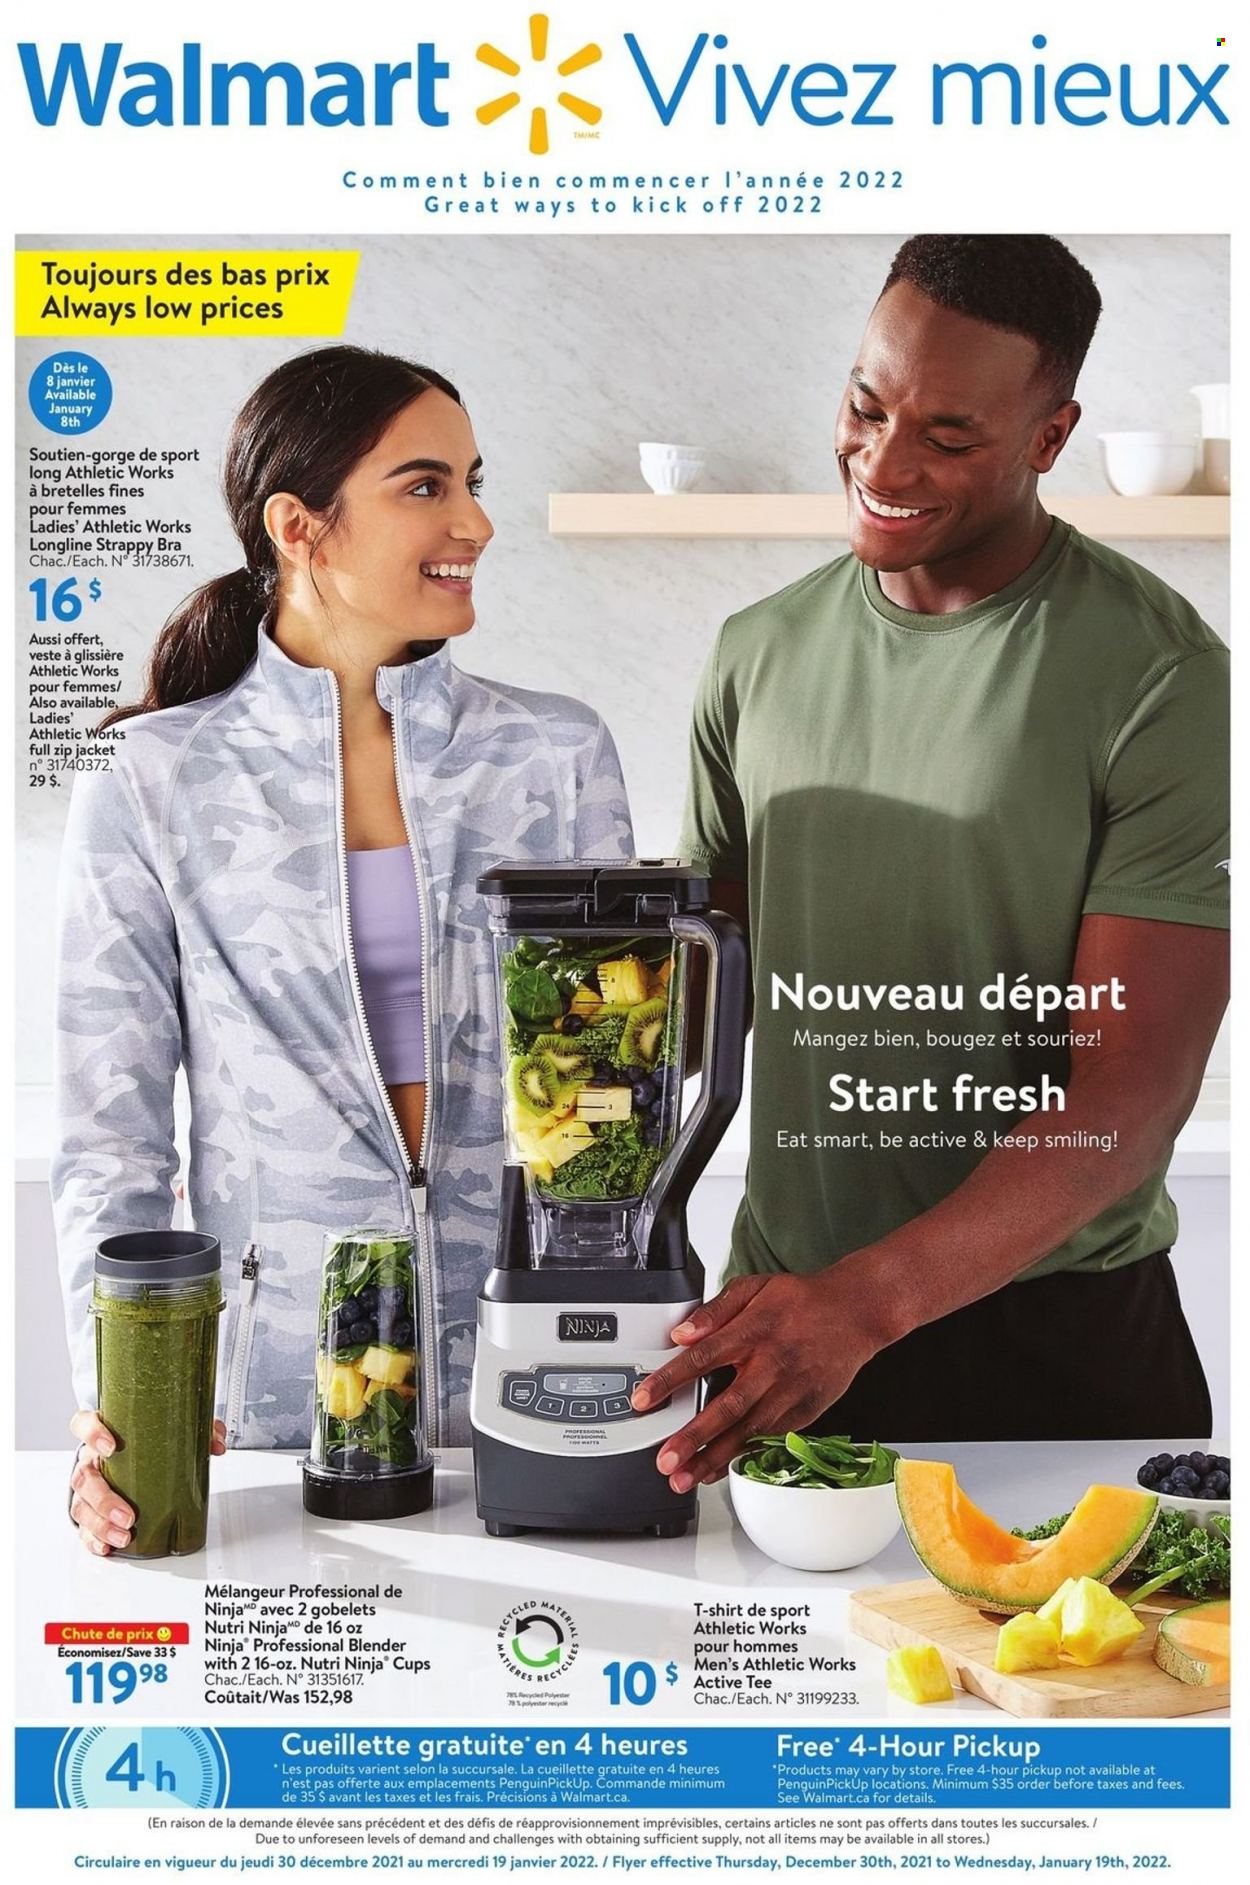 thumbnail - Walmart Flyer - December 30, 2021 - January 19, 2022 - Sales products - cup, jacket, t-shirt, bra, blender. Page 1.